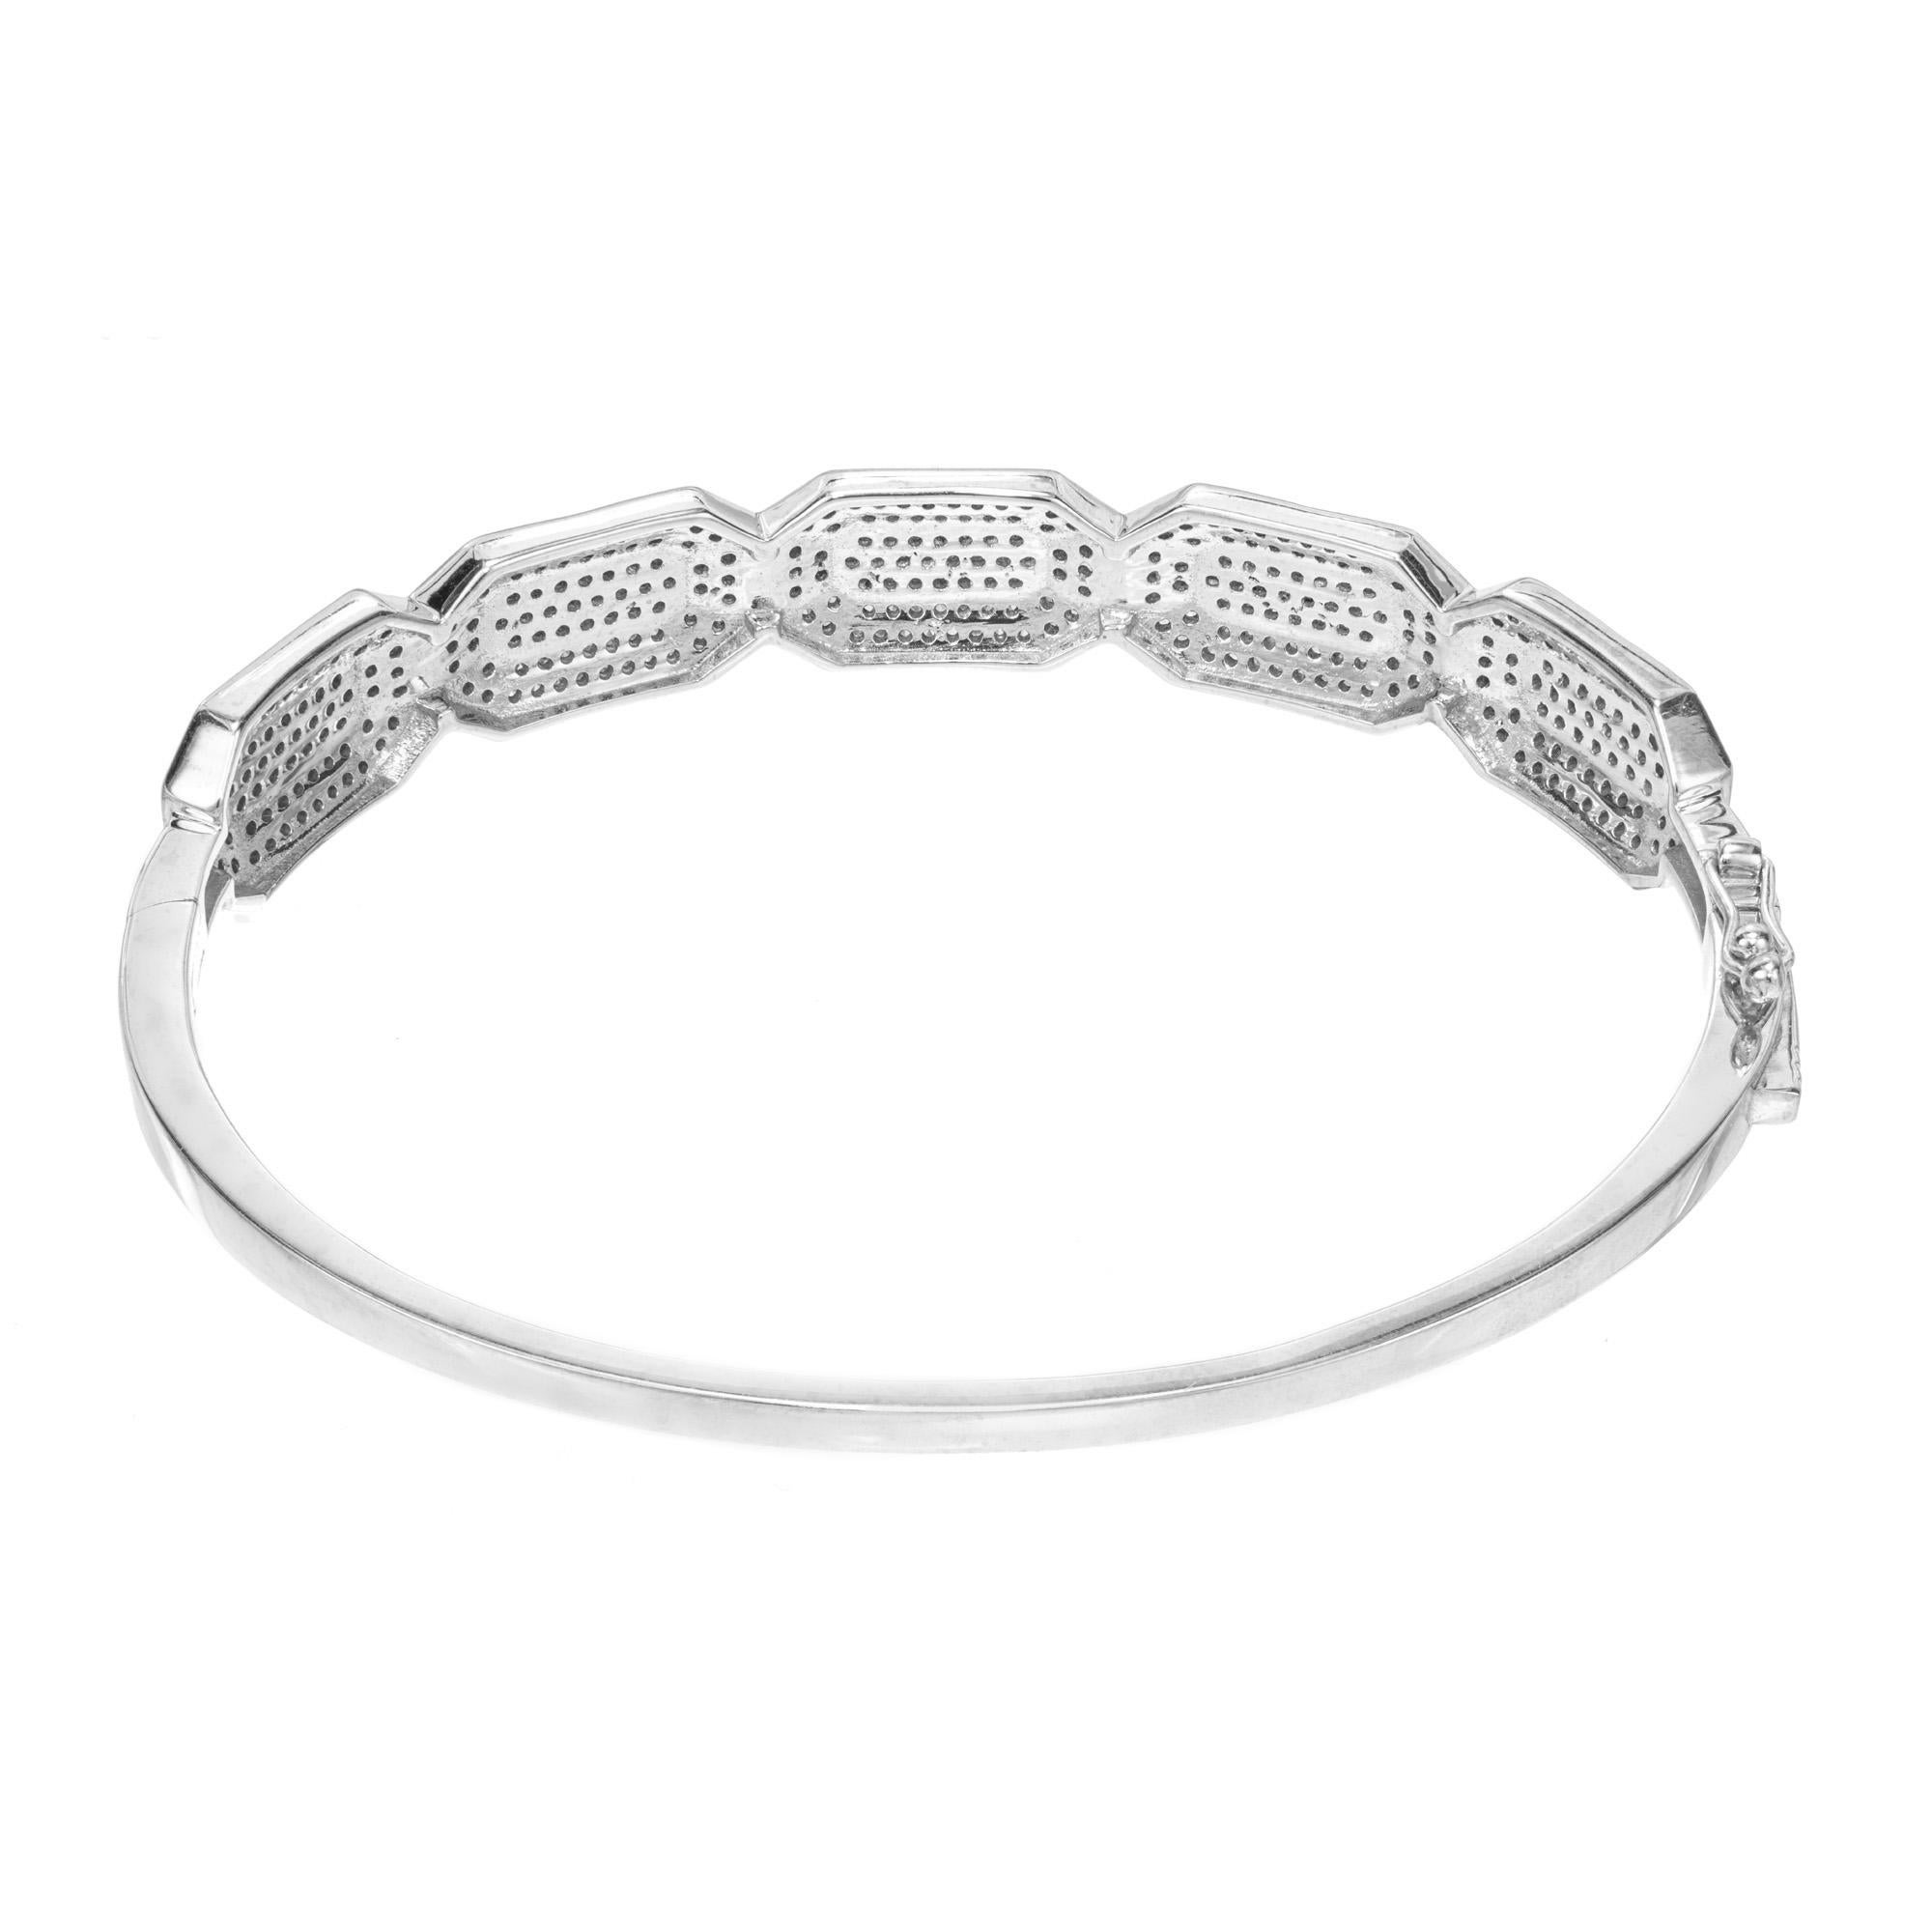 1.80 Carat Single Cut Diamond White Gold Bangle Bracelet In Good Condition For Sale In Stamford, CT